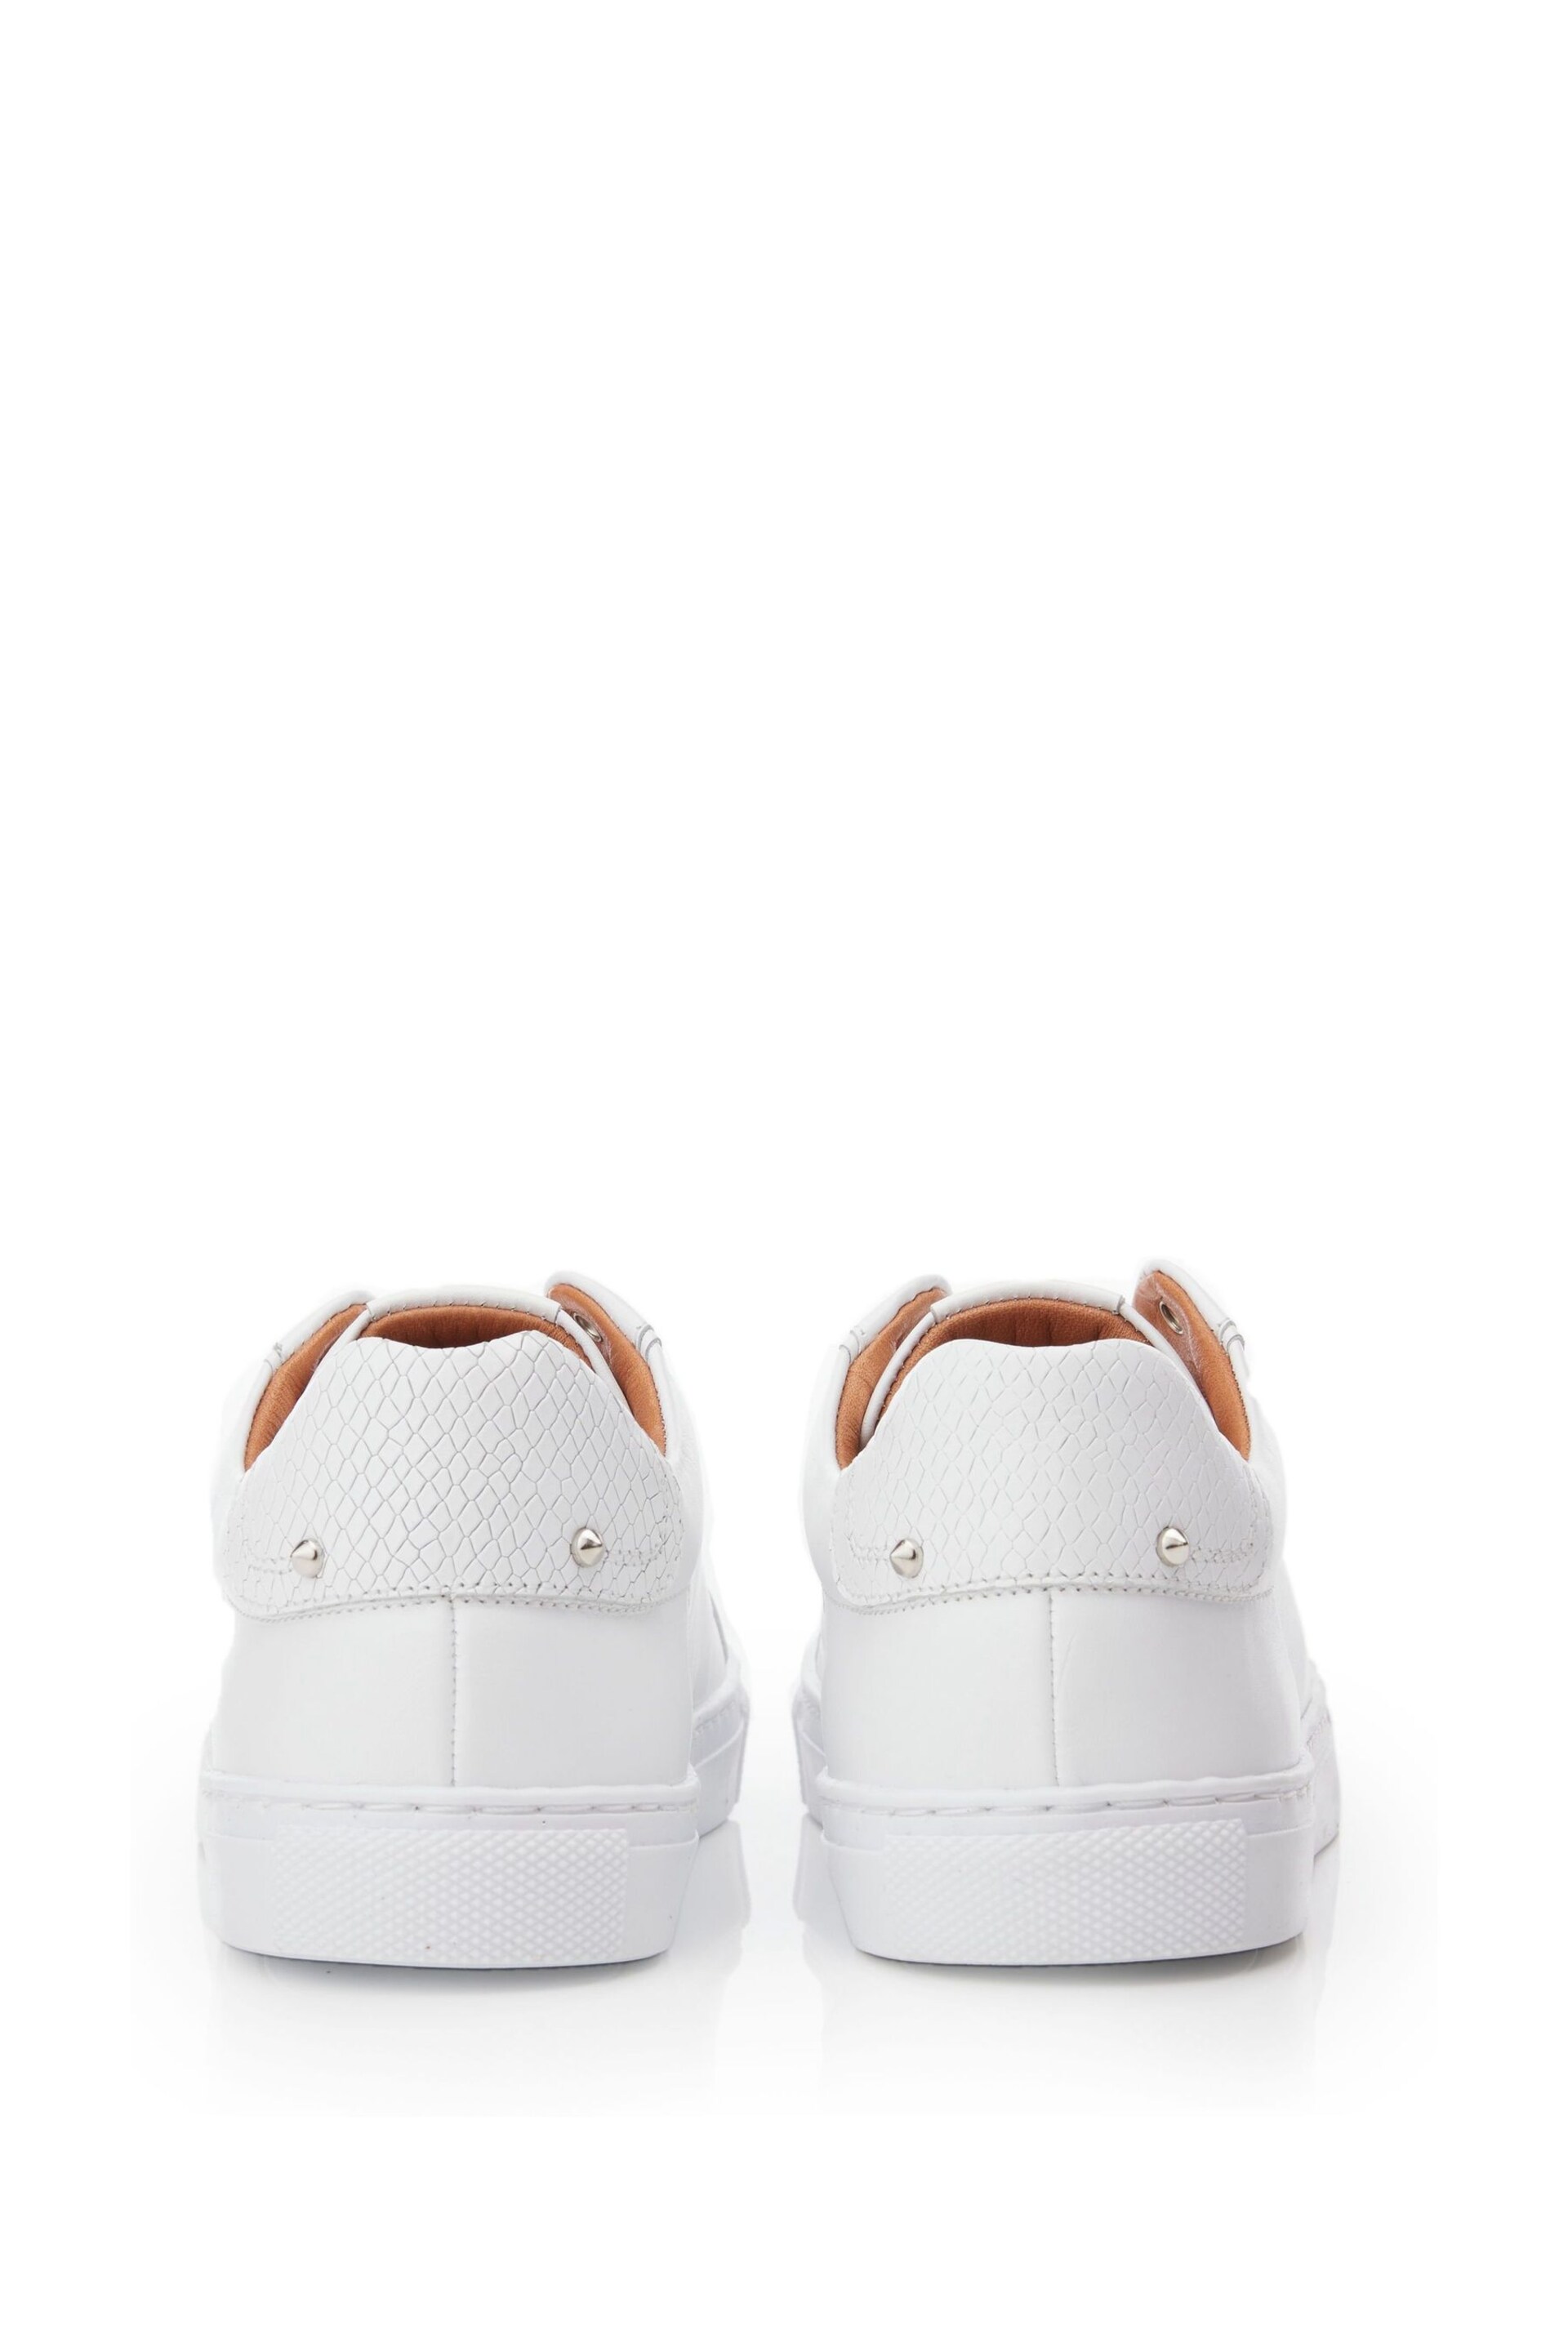 Moda in Pelle Bencina Slip On White Trainers with Elastic - Image 4 of 5